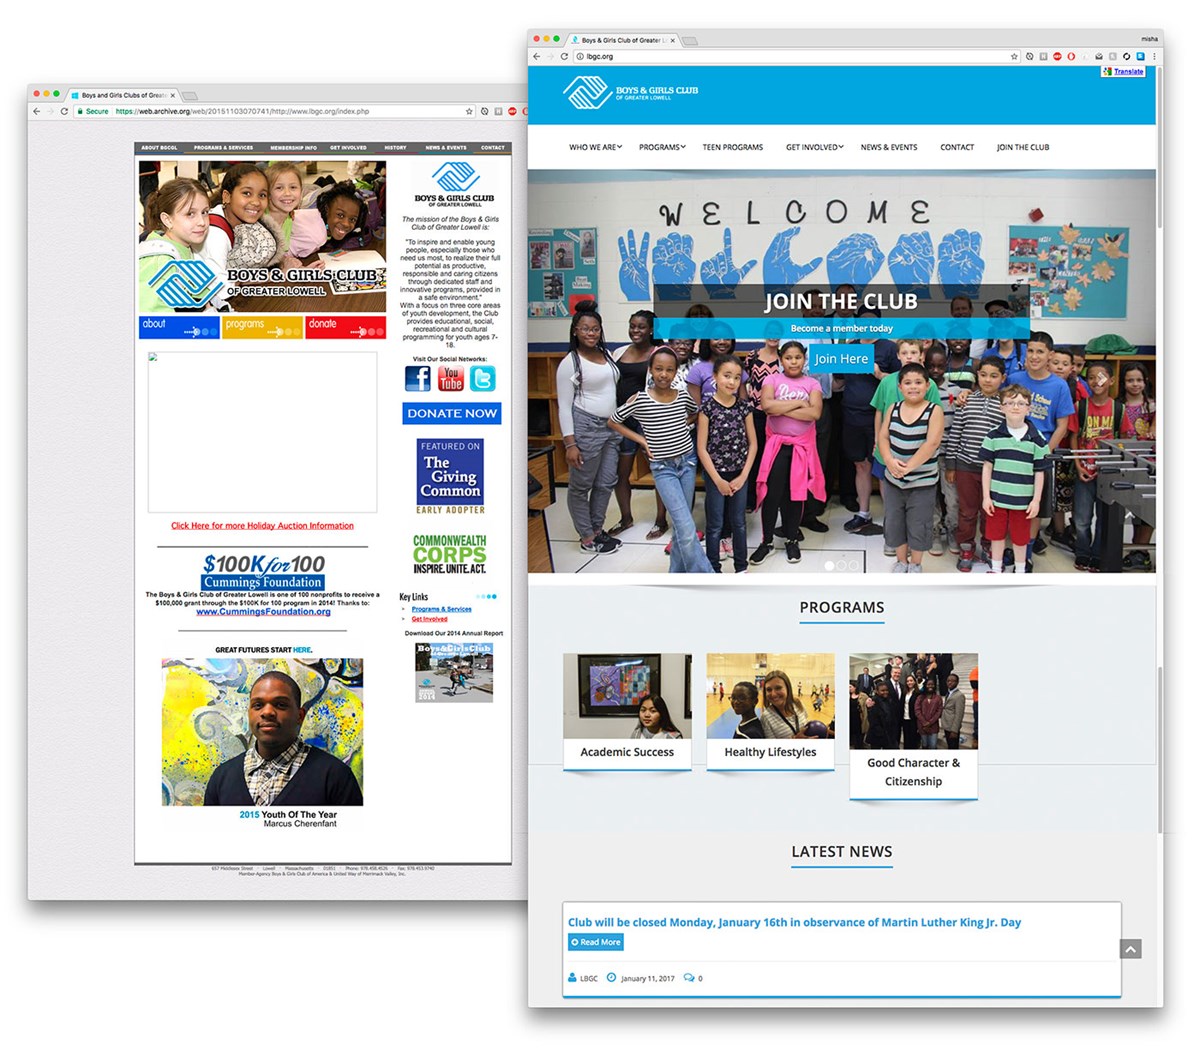 Boys and Girls Club of Greater Lowell Website Redesign (with WordPress) by Melanie DesRoches, Tianwei Du, Cynthia Hoac